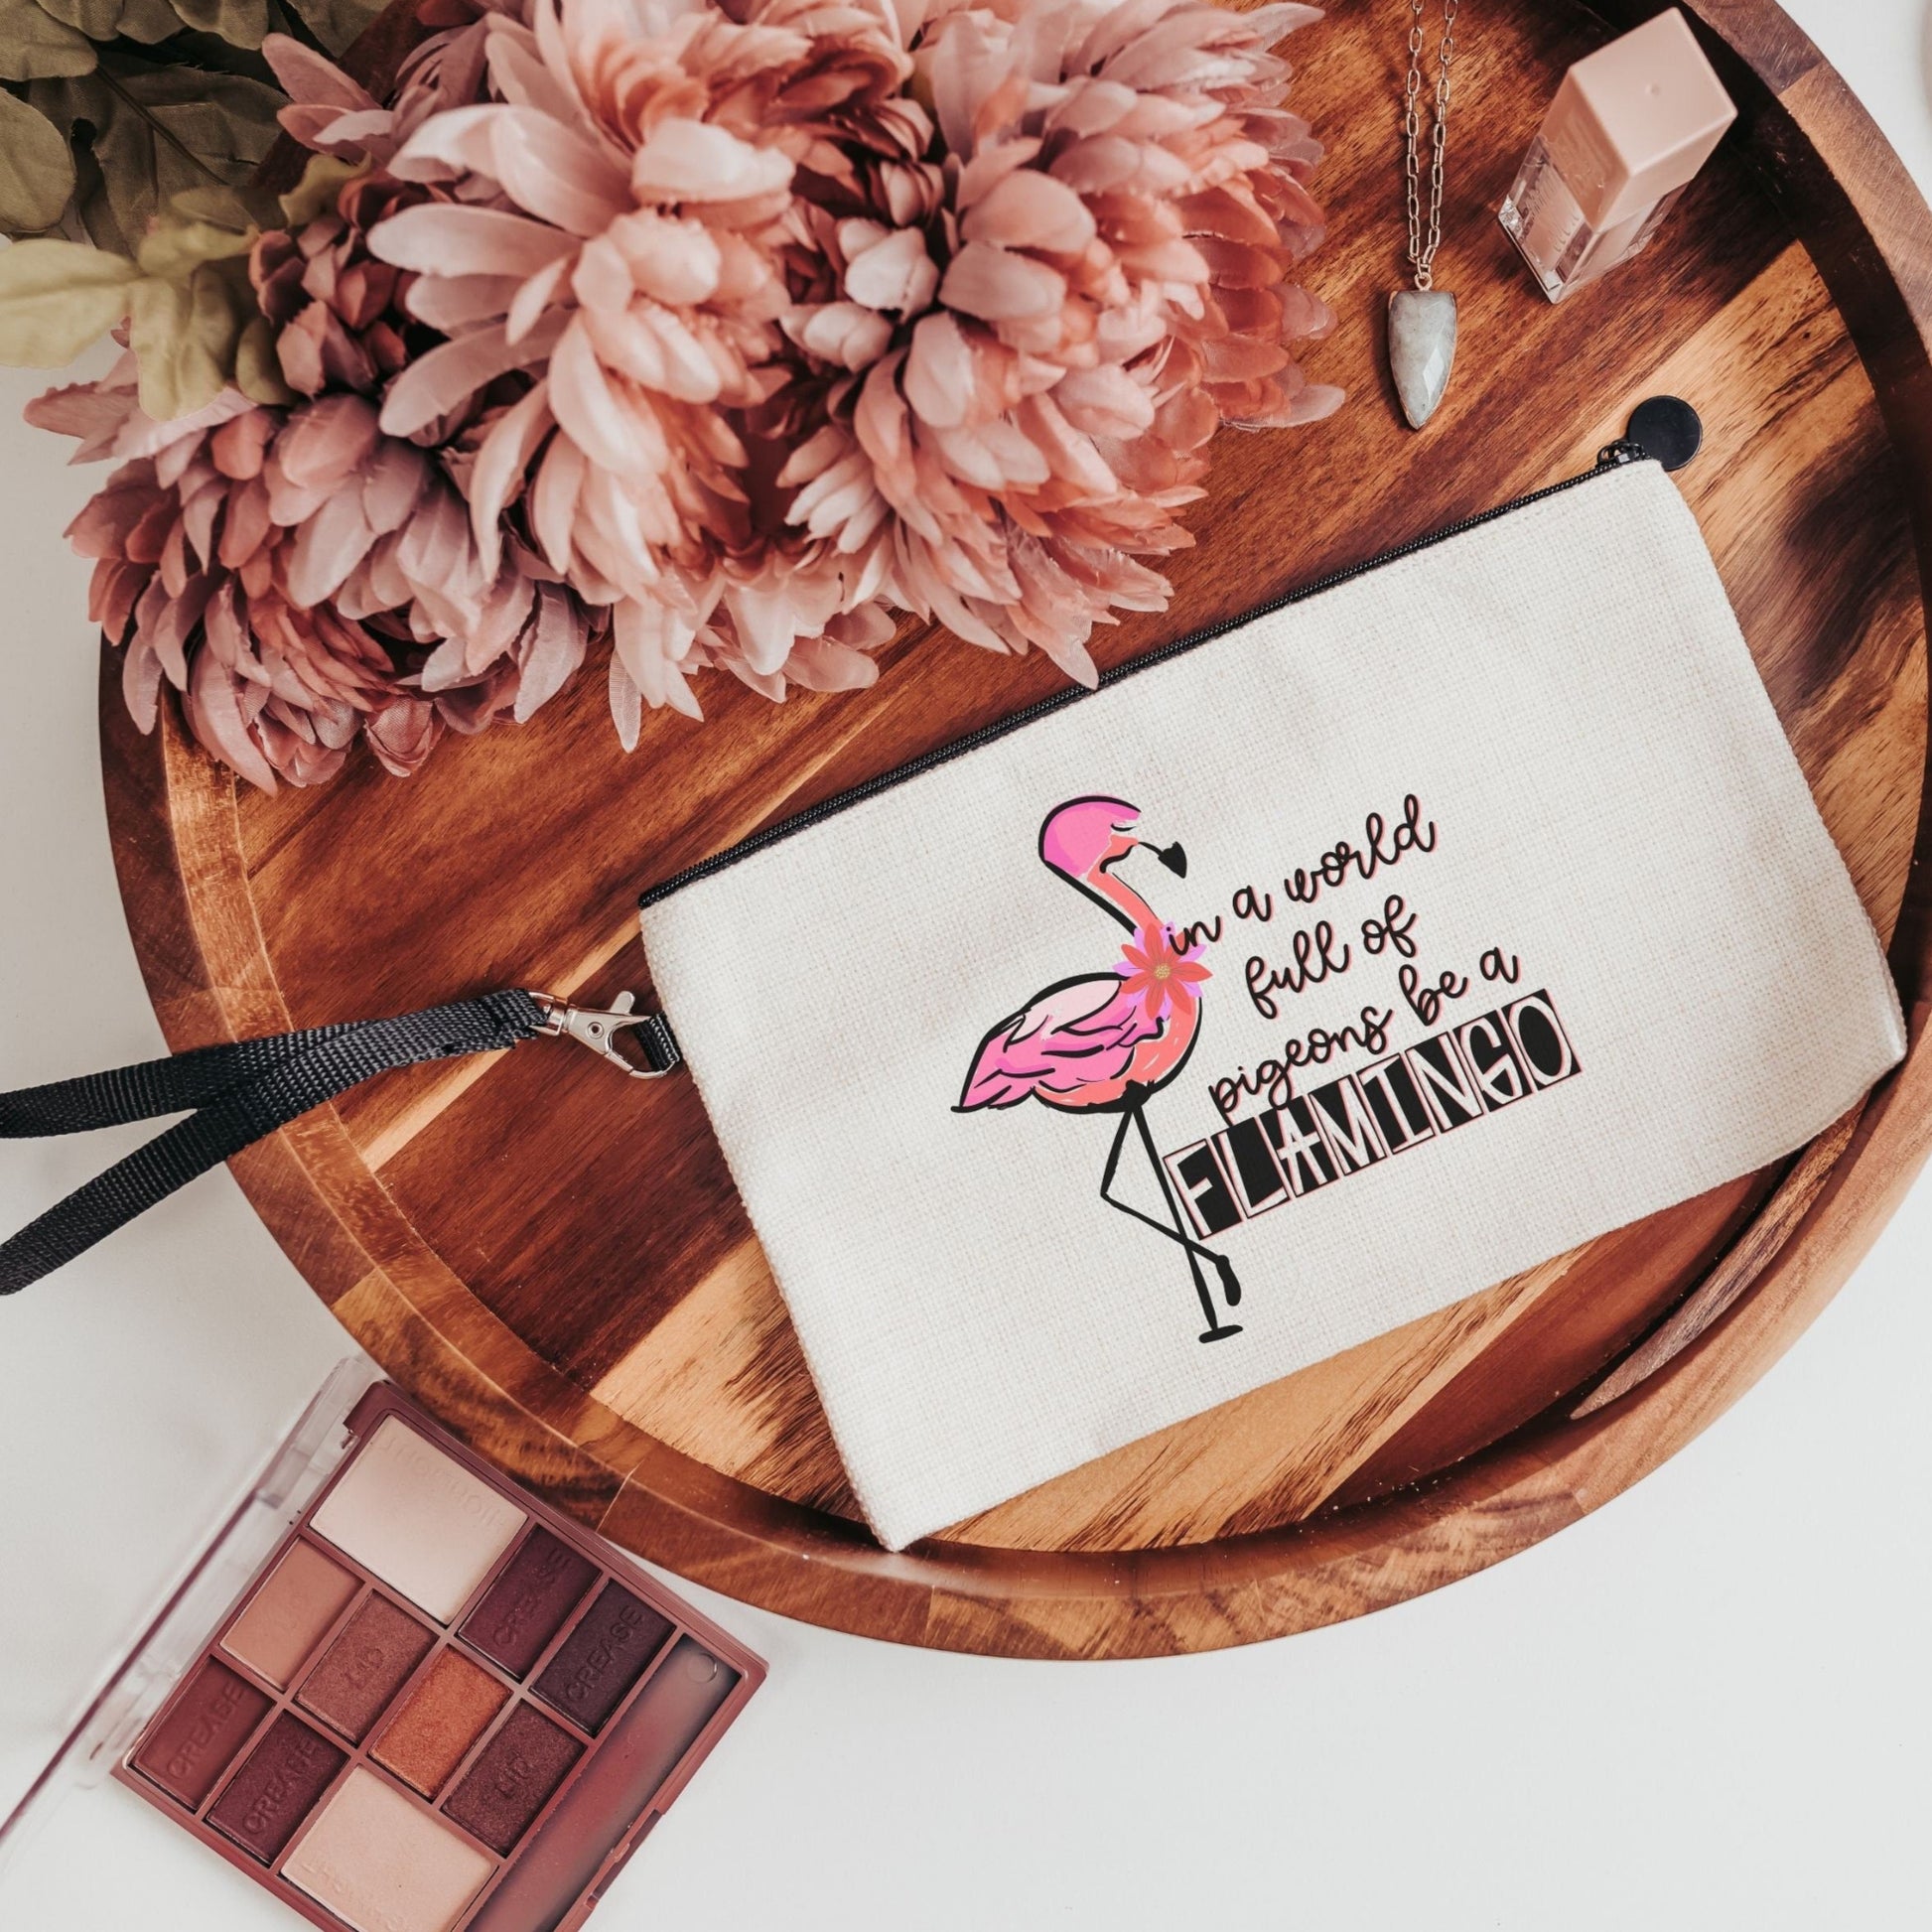 Makeup Artist Gift - Perfect for Organizing Beauty Essentials